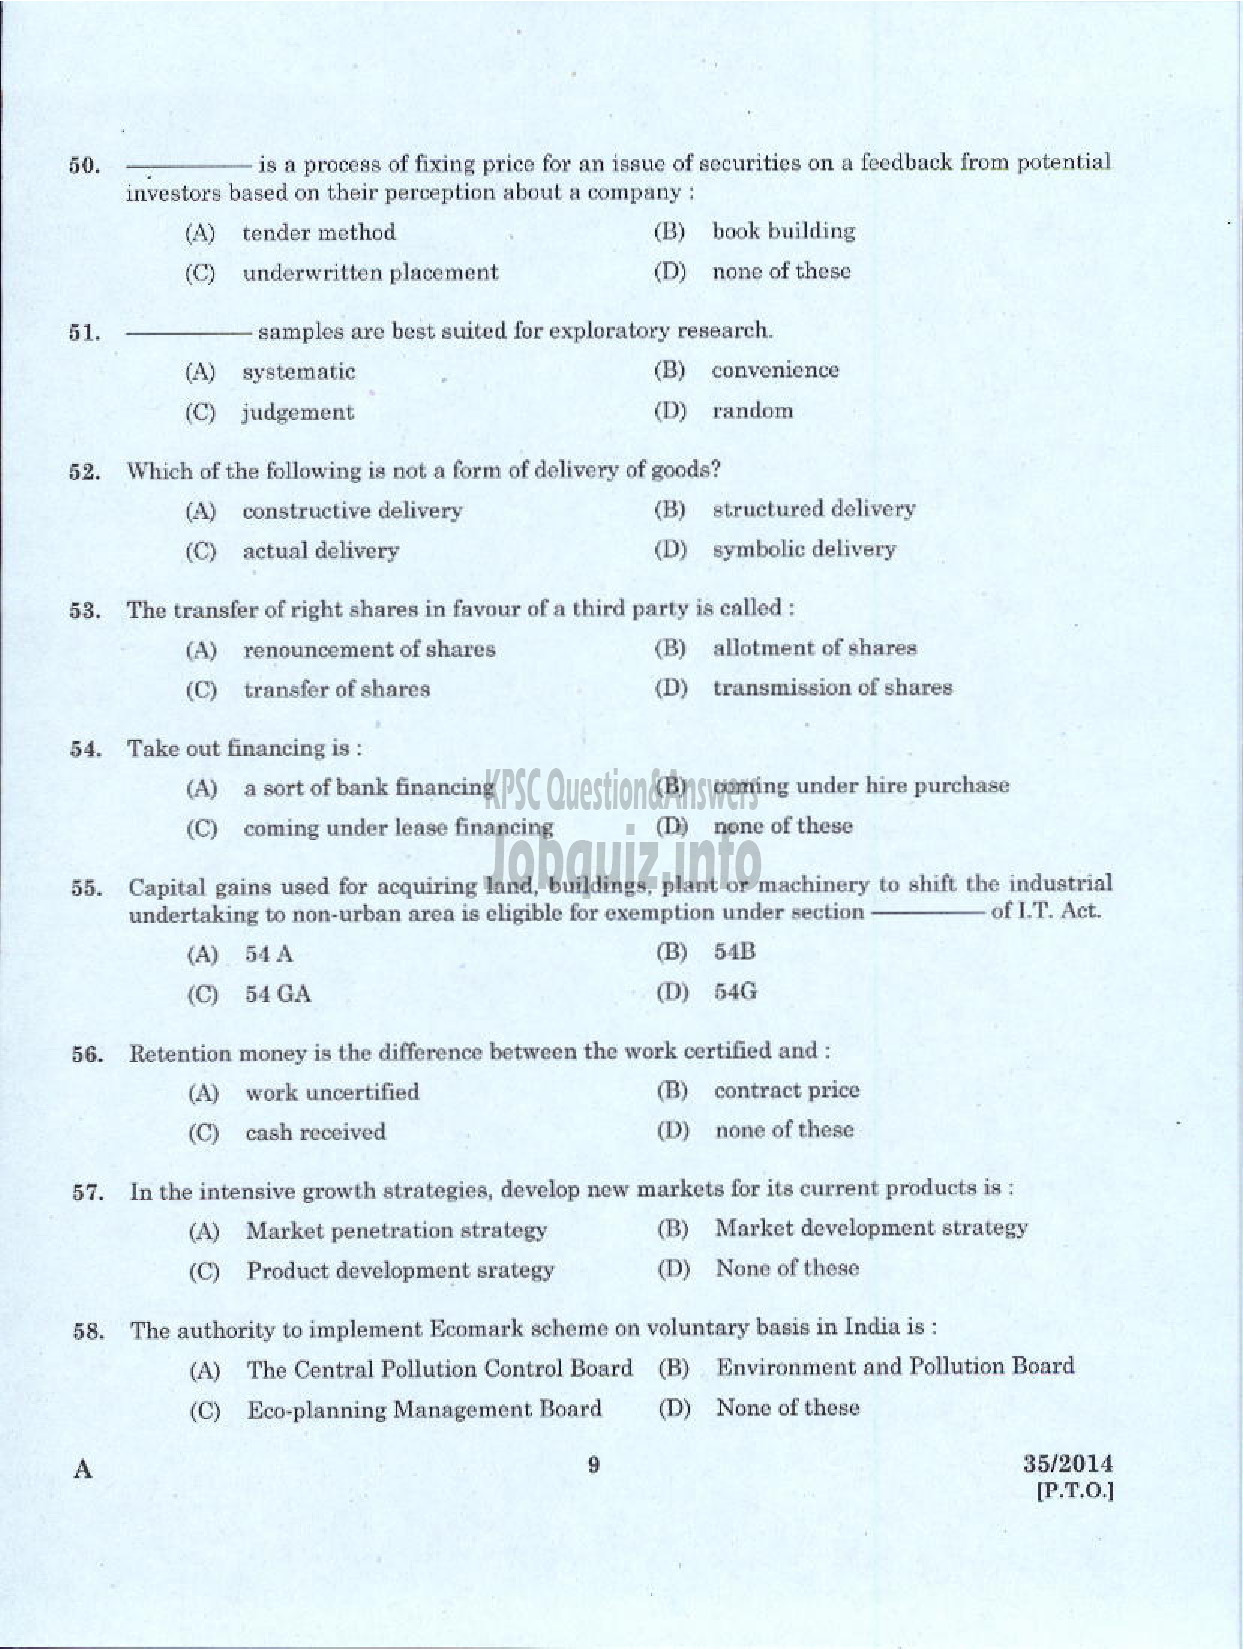 Kerala PSC Question Paper - JUNIOR ASSISTANT ACCOUNTS SR FOR ST ONLY TRAVANCORE COCHIN CHEMICALS LIMITED-7